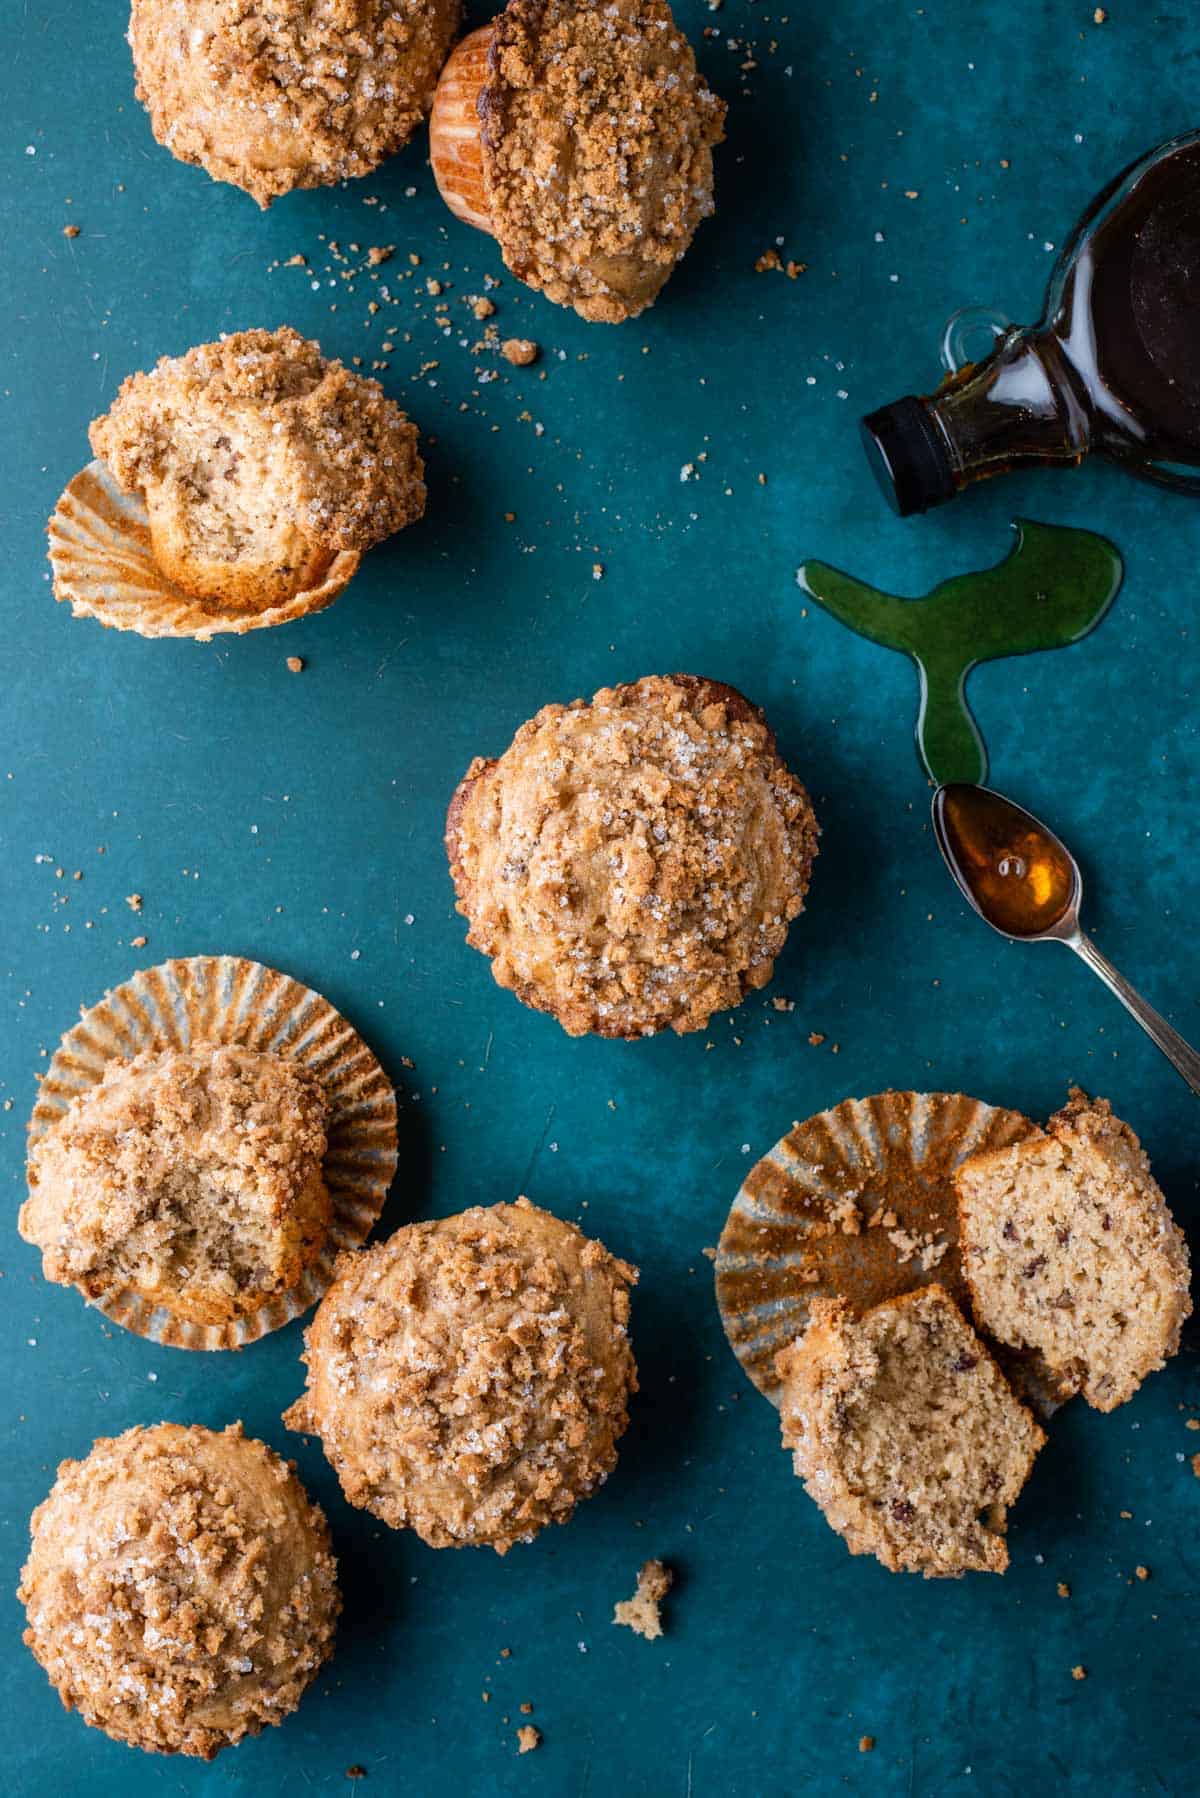 several maple pecan muffins on a dark teal surface, some sitting upright, some on their side, cut in half or with a bite out, with a bottle of maple syrup laying on its side and a spoon with maple syrup on it and drizzled around it